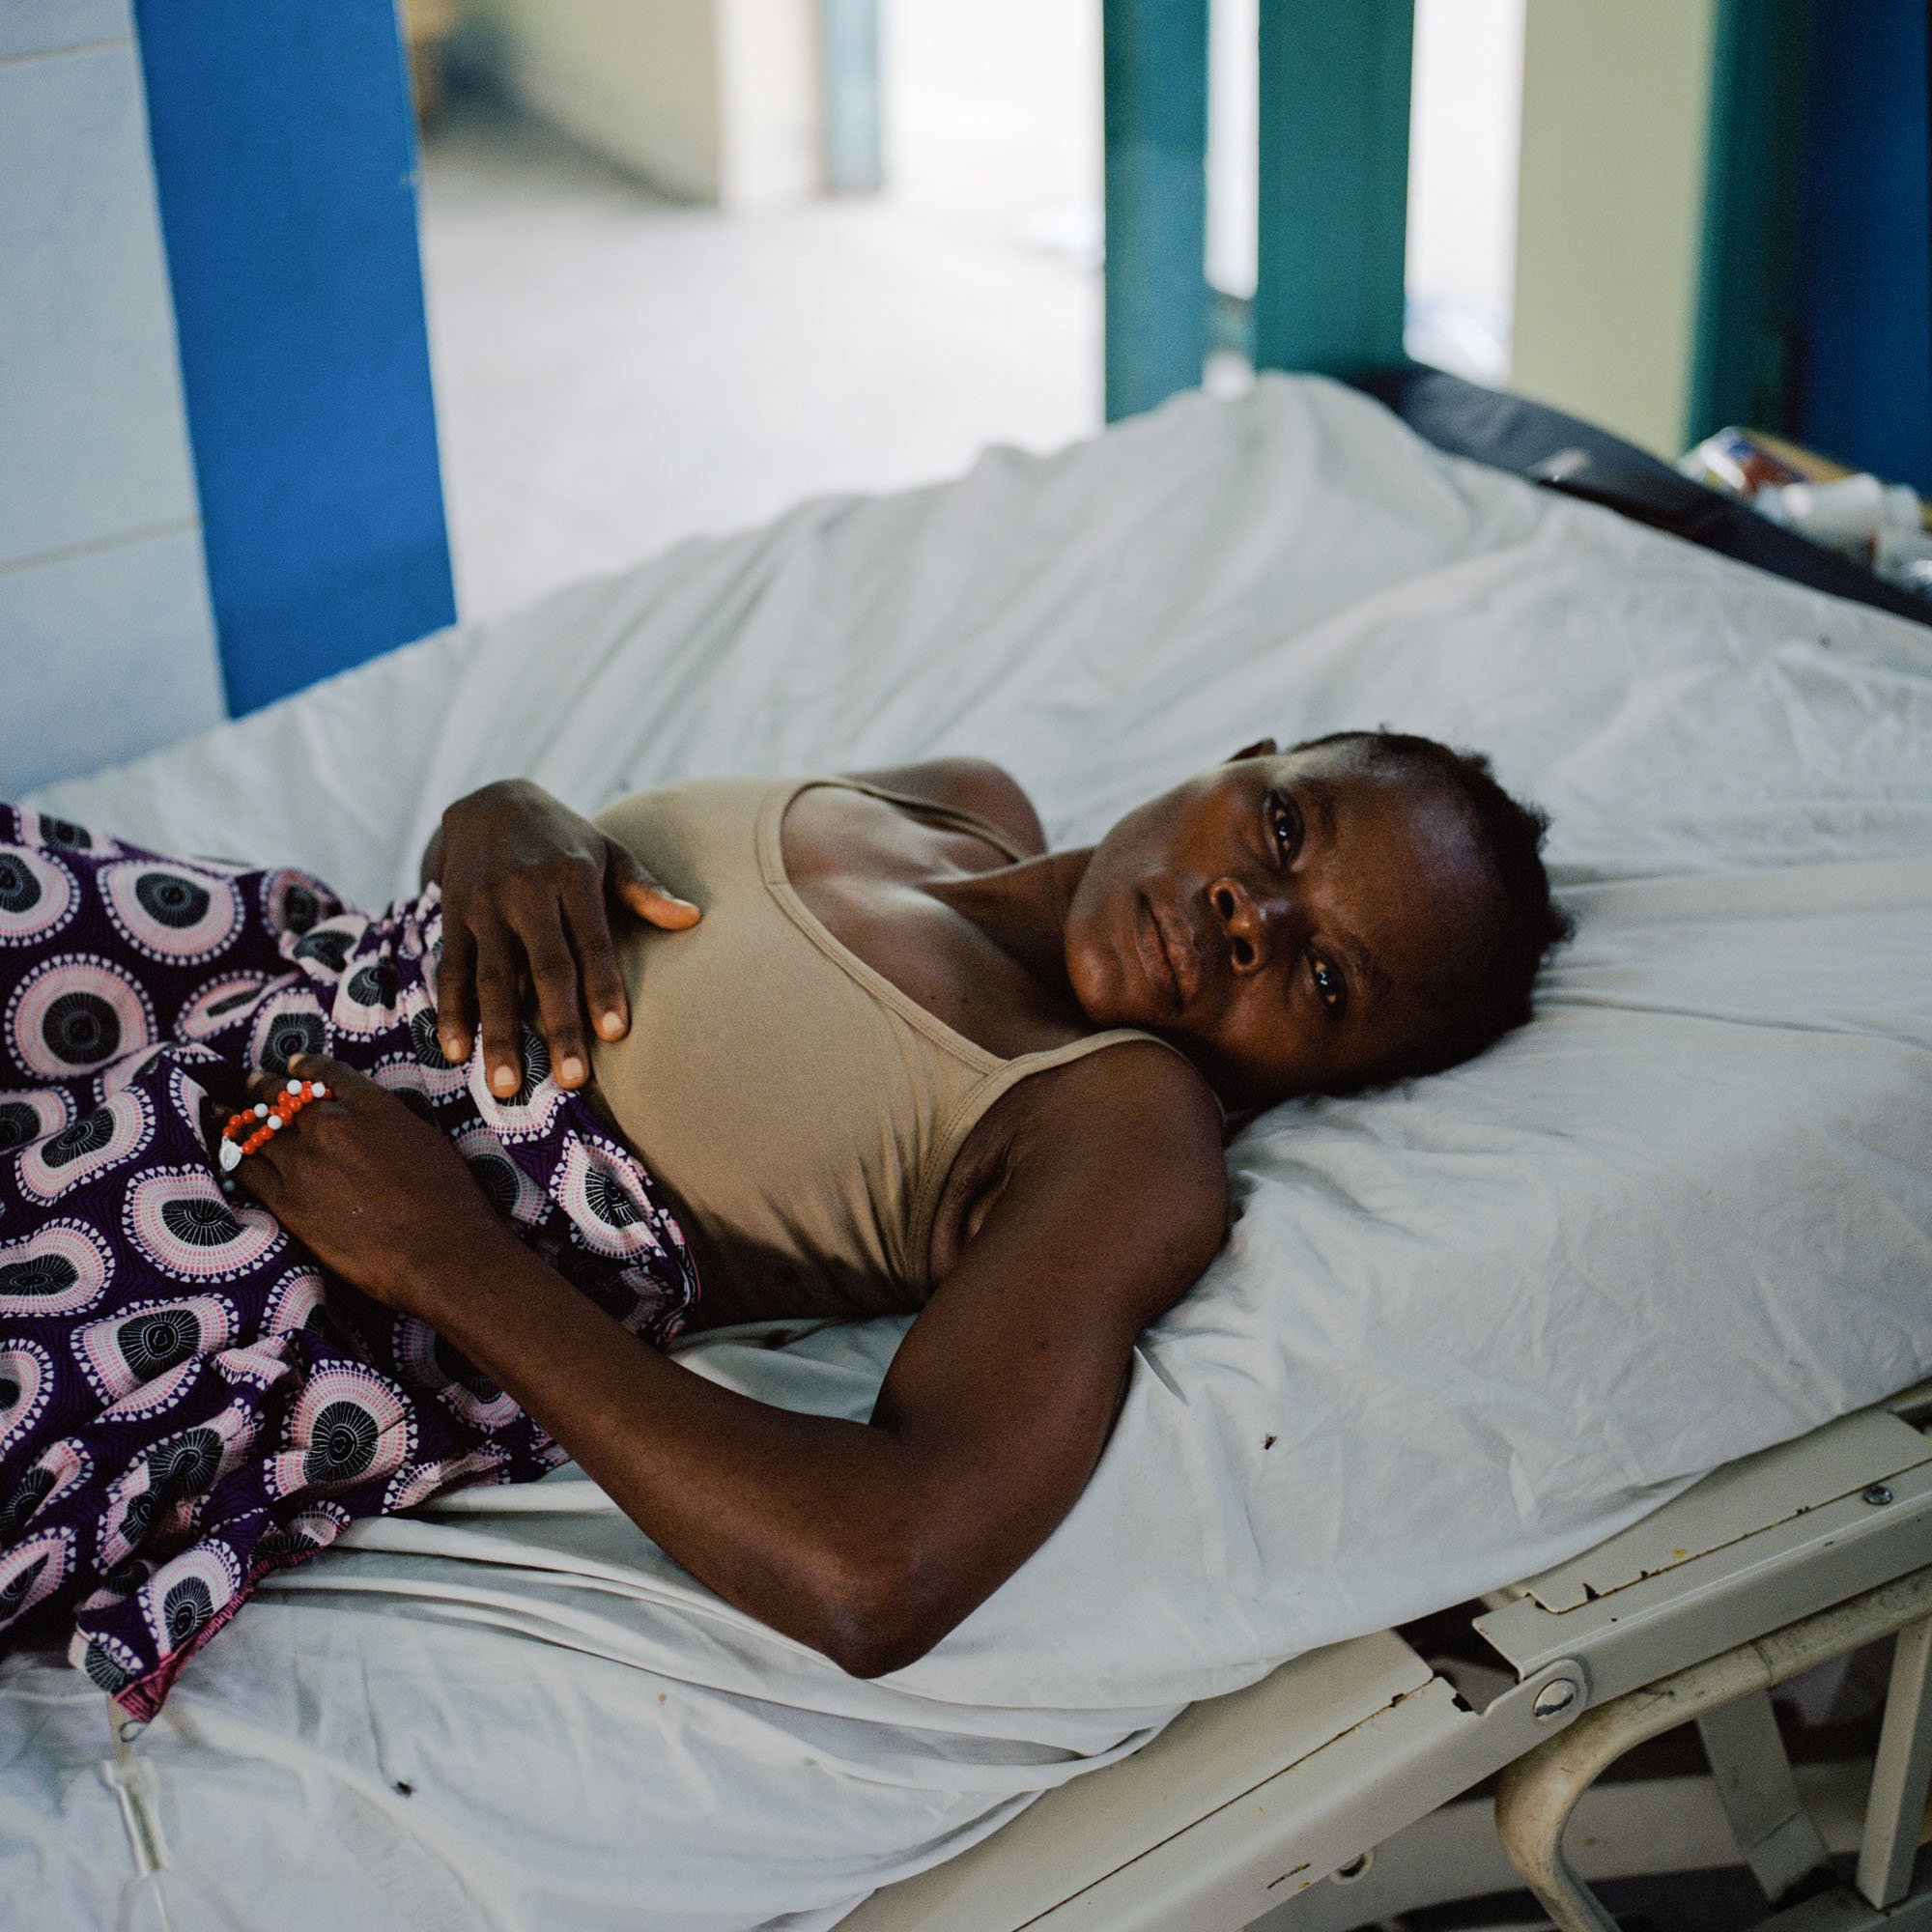 Christine is recovering from her surgery. Always marginalized because she was childless and handicapped by polio contracted when she was a child, she came to live in Kinshasa in 2010. A few years later, she became pregnant. The man is 